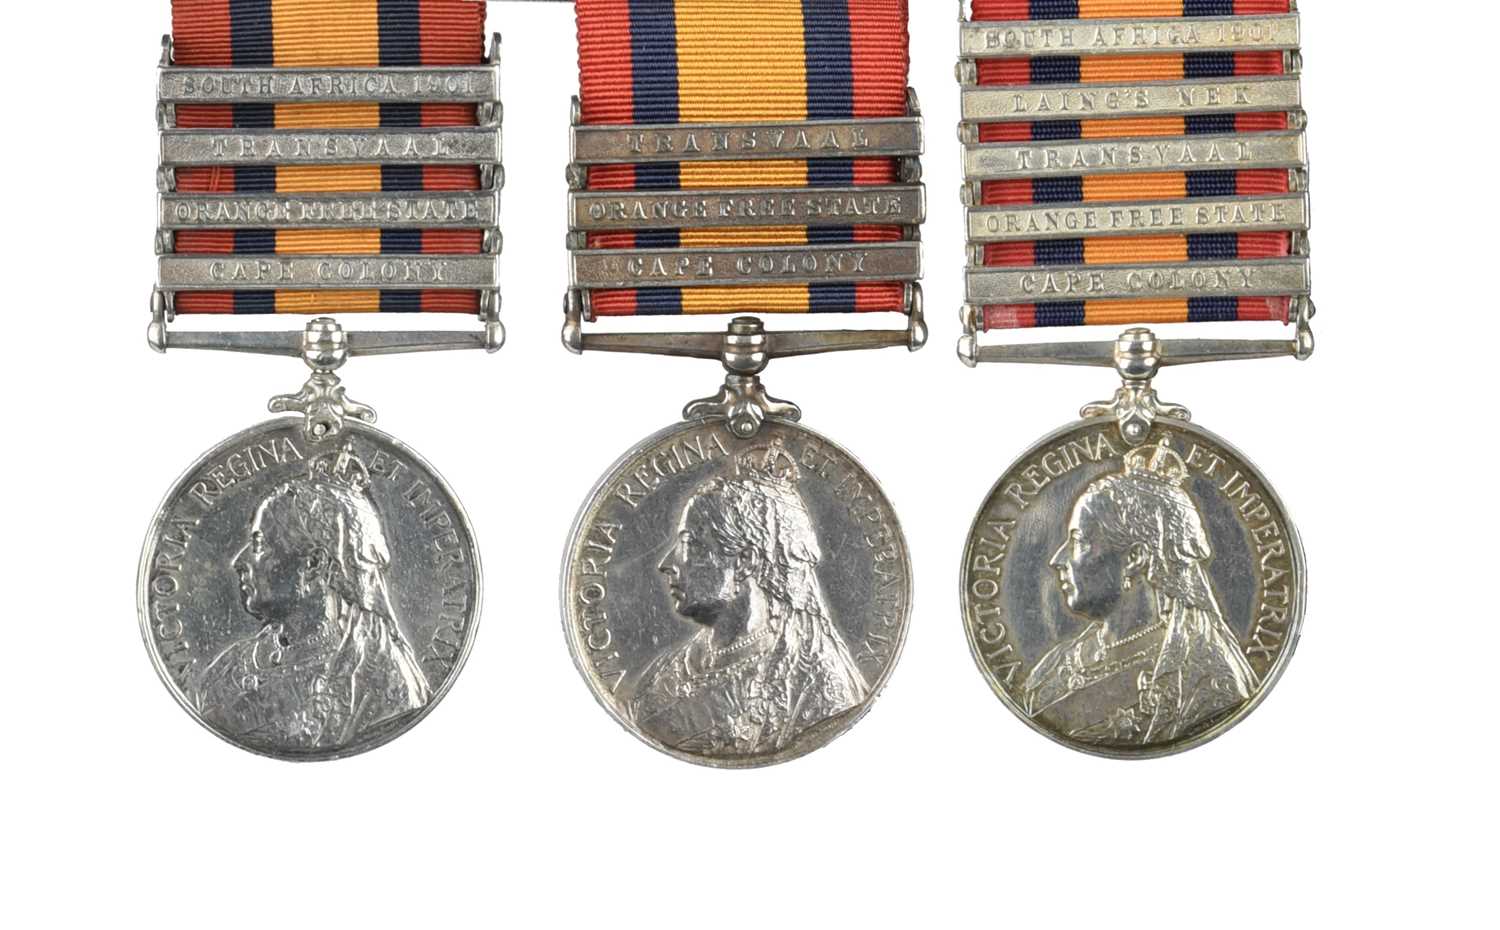 A Queen's South Africa Medal to Lance Corporal G. Taylor, 112th Company Imperial Yeomanry, 4 clasps: